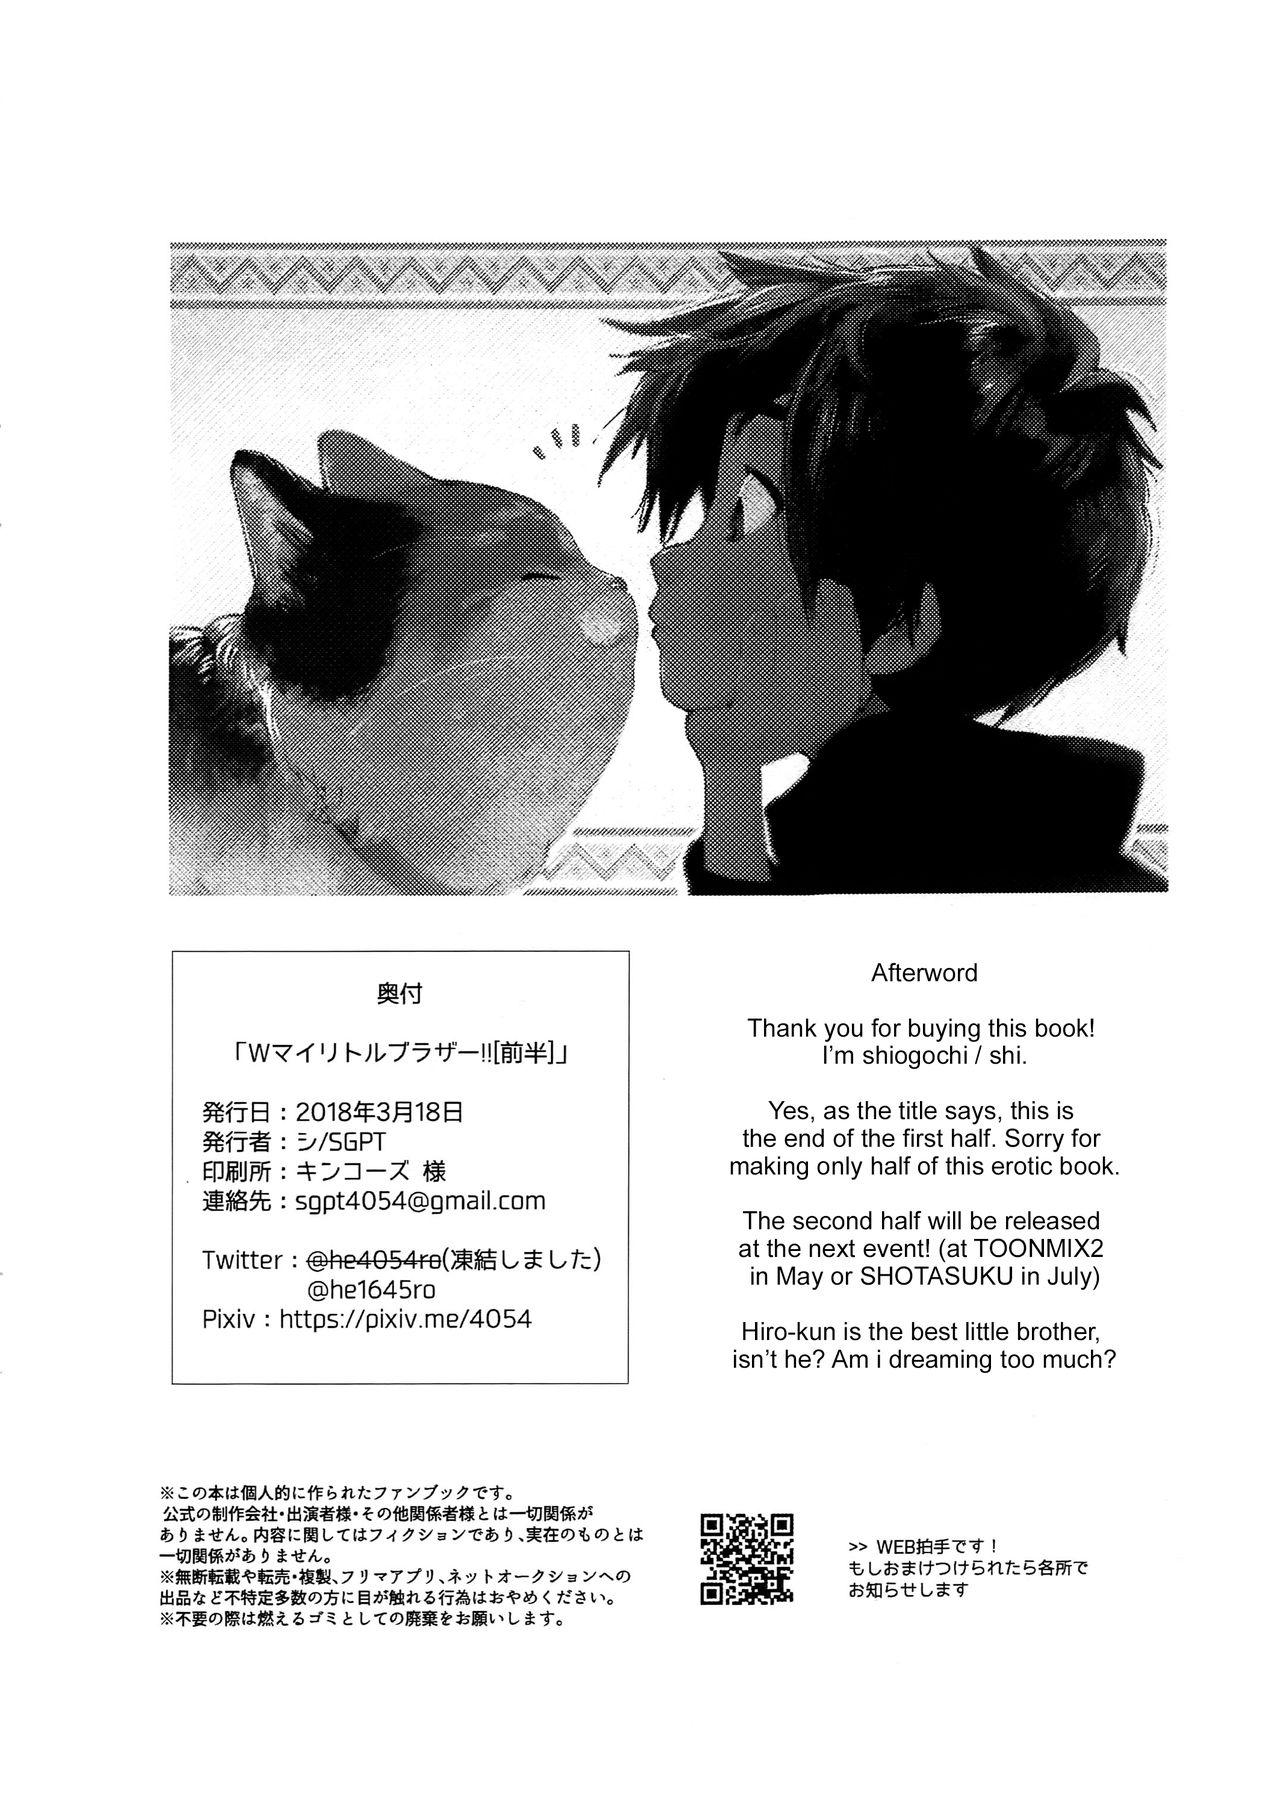 (HaruCC23) [SGPT (Shi)] Double My Little Brother!! [Zenhan] | Double My Little Brother!! [First Half] (Big Hero 6) [English] {Shotachan} 24